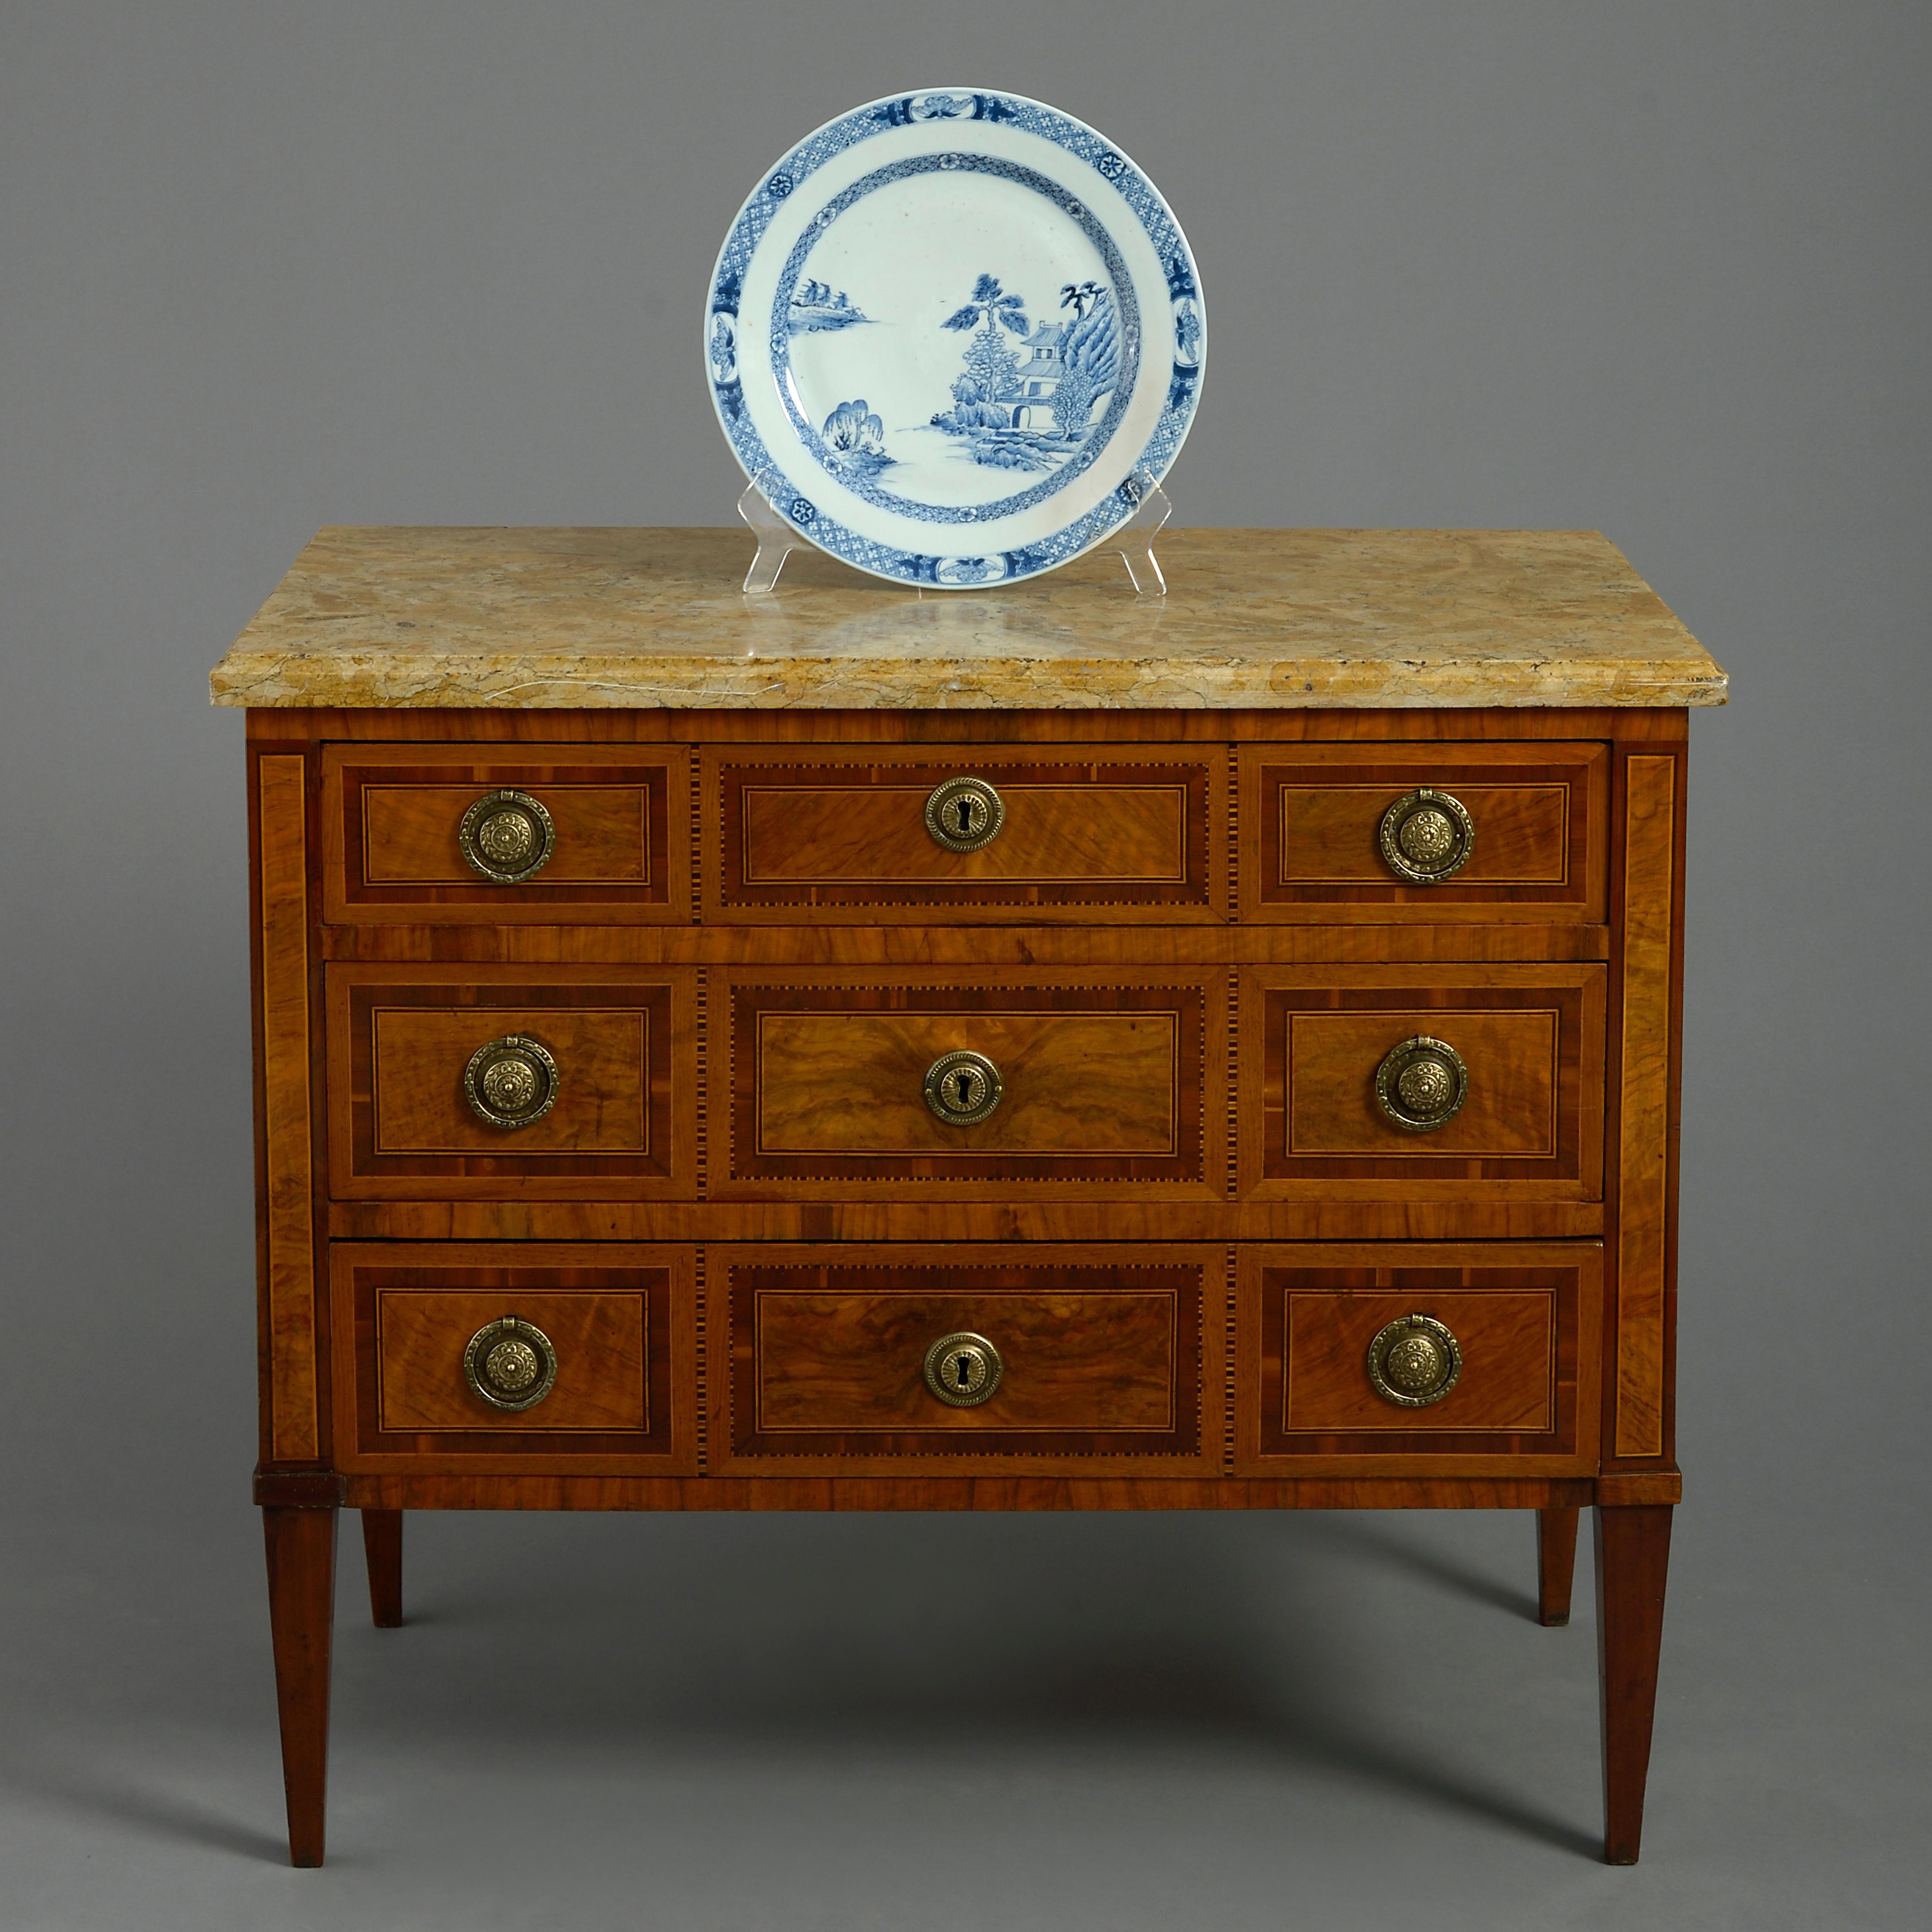 A fine late 19th century commode in the neoclassical taste, the figured marble top above three drawers with medallion brass handles and lock escutcheons, the front and sides all veneered in walnut, tulipwood and boxwood paneling and raised on square